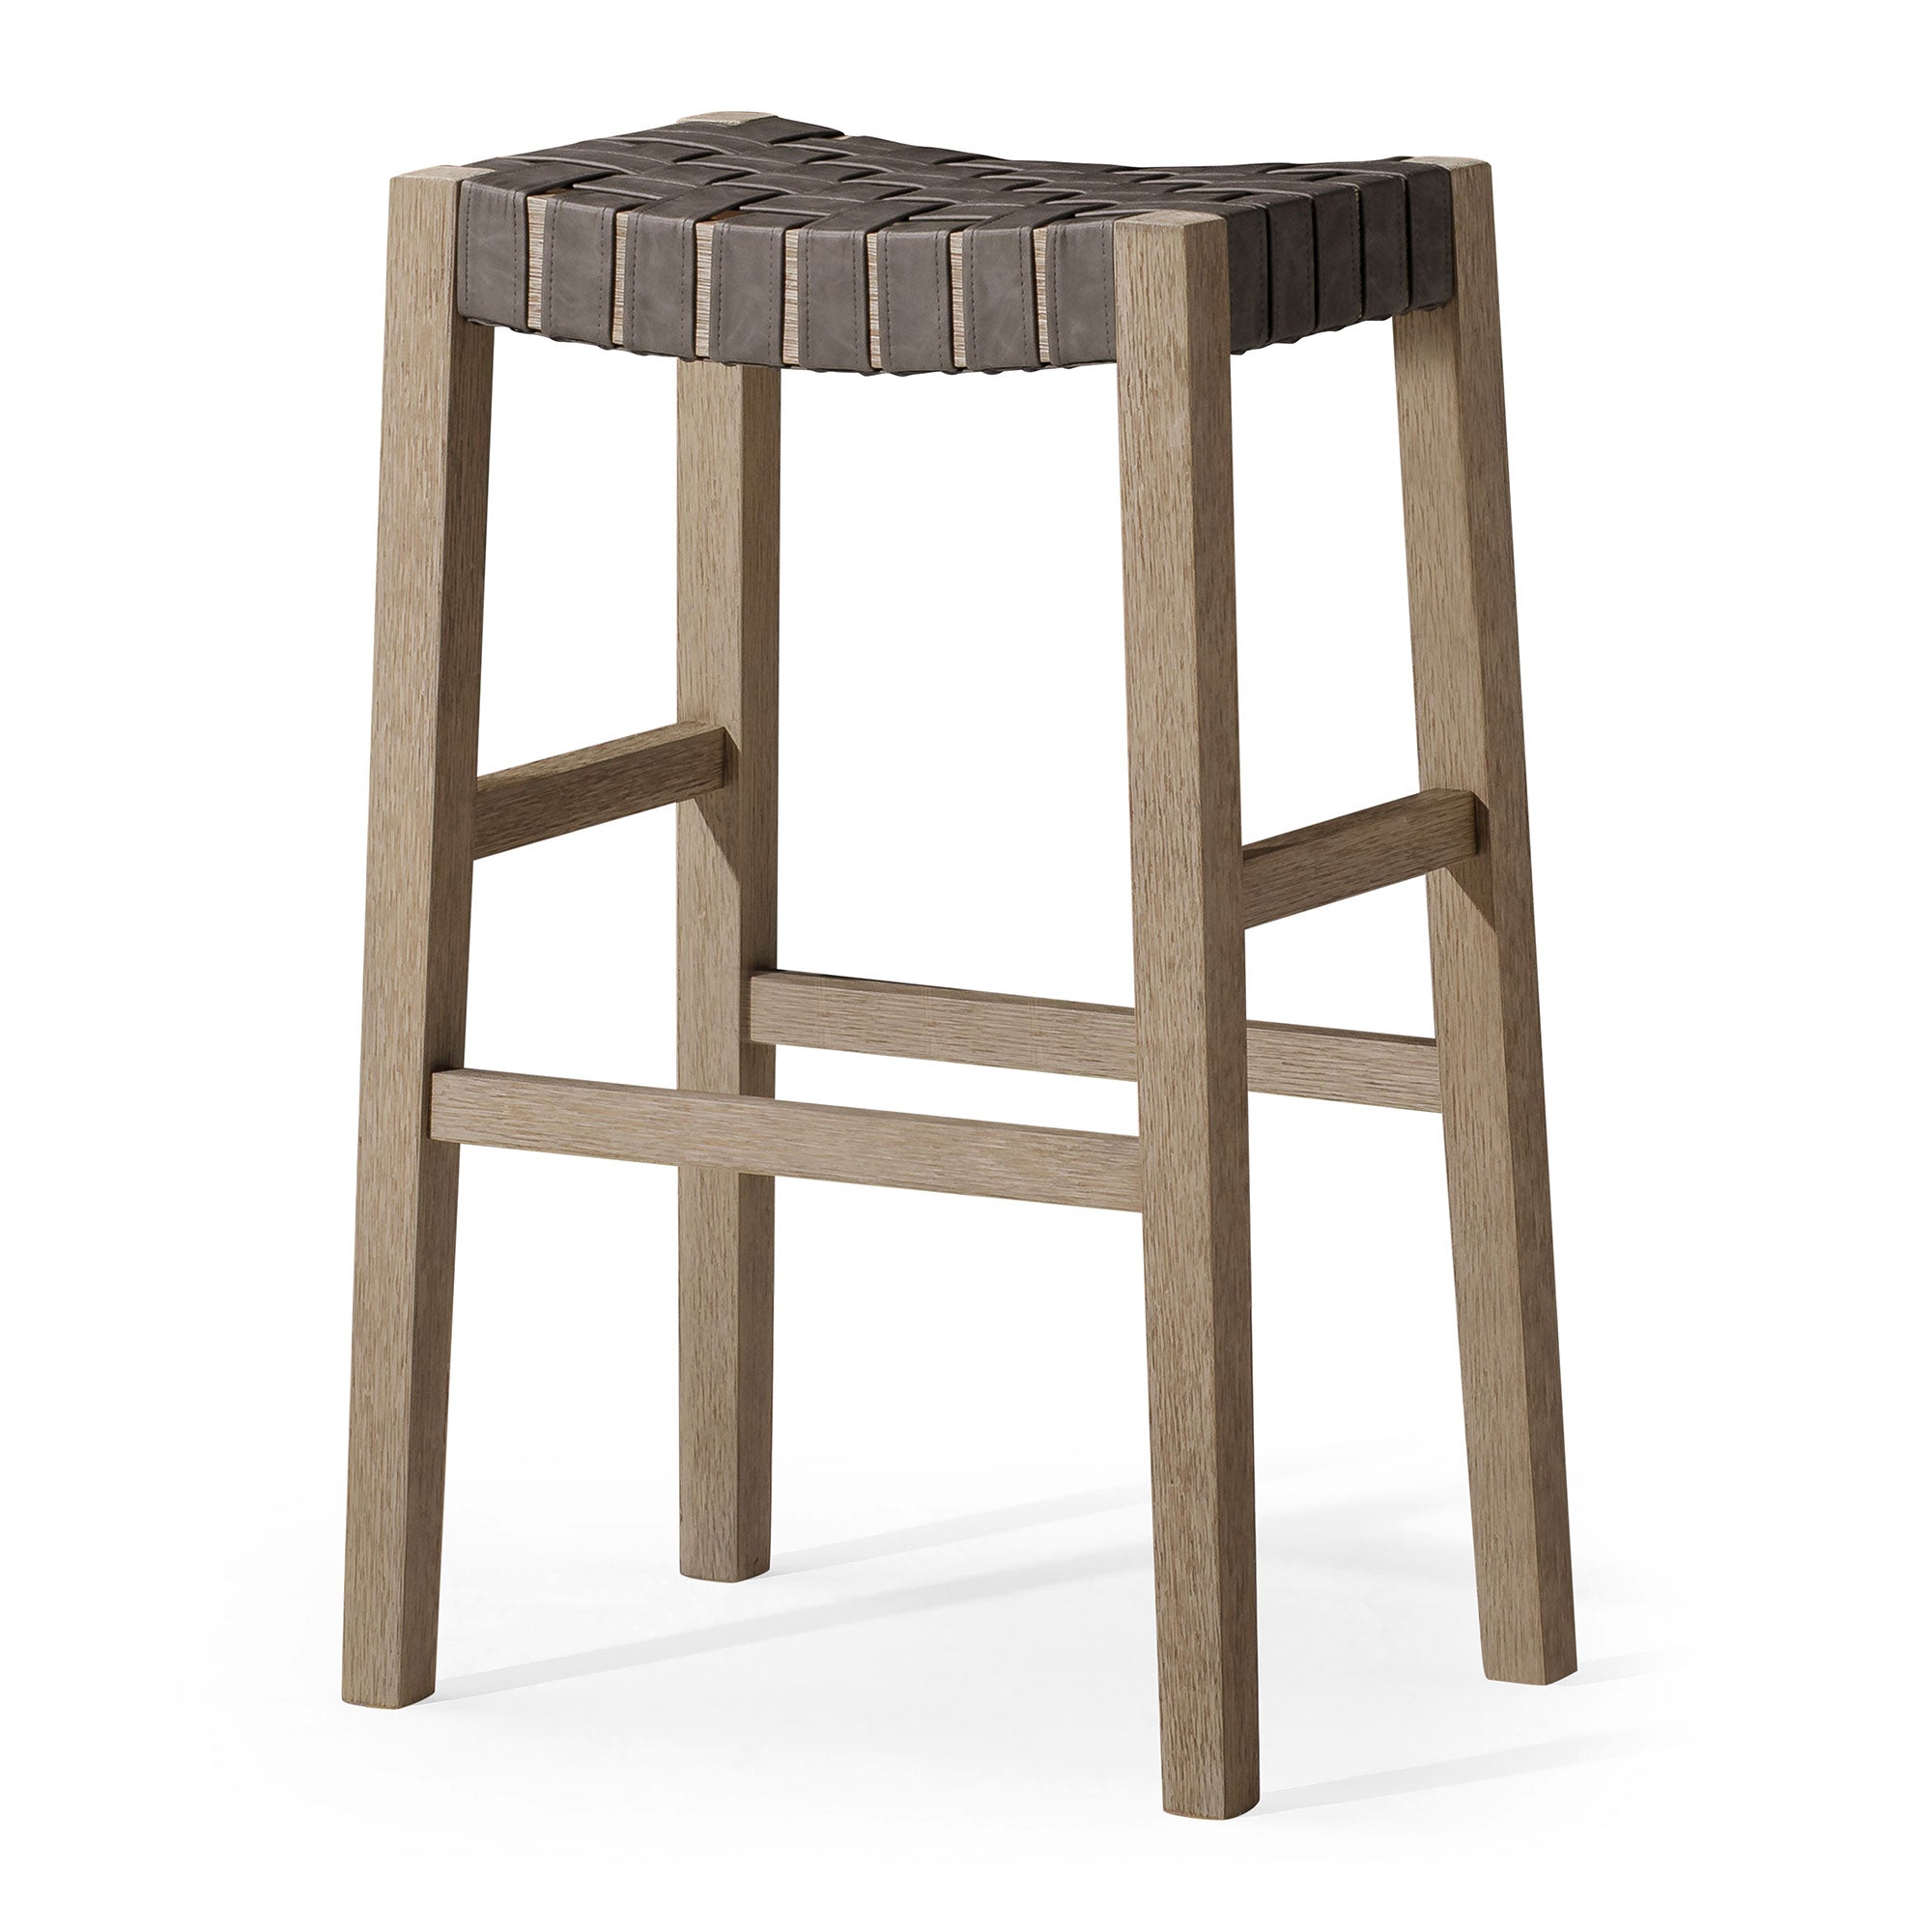 Emerson Bar Stool in Weathered Grey Wood Finish with Ronan Stone Vegan Leather in Stools by Maven Lane